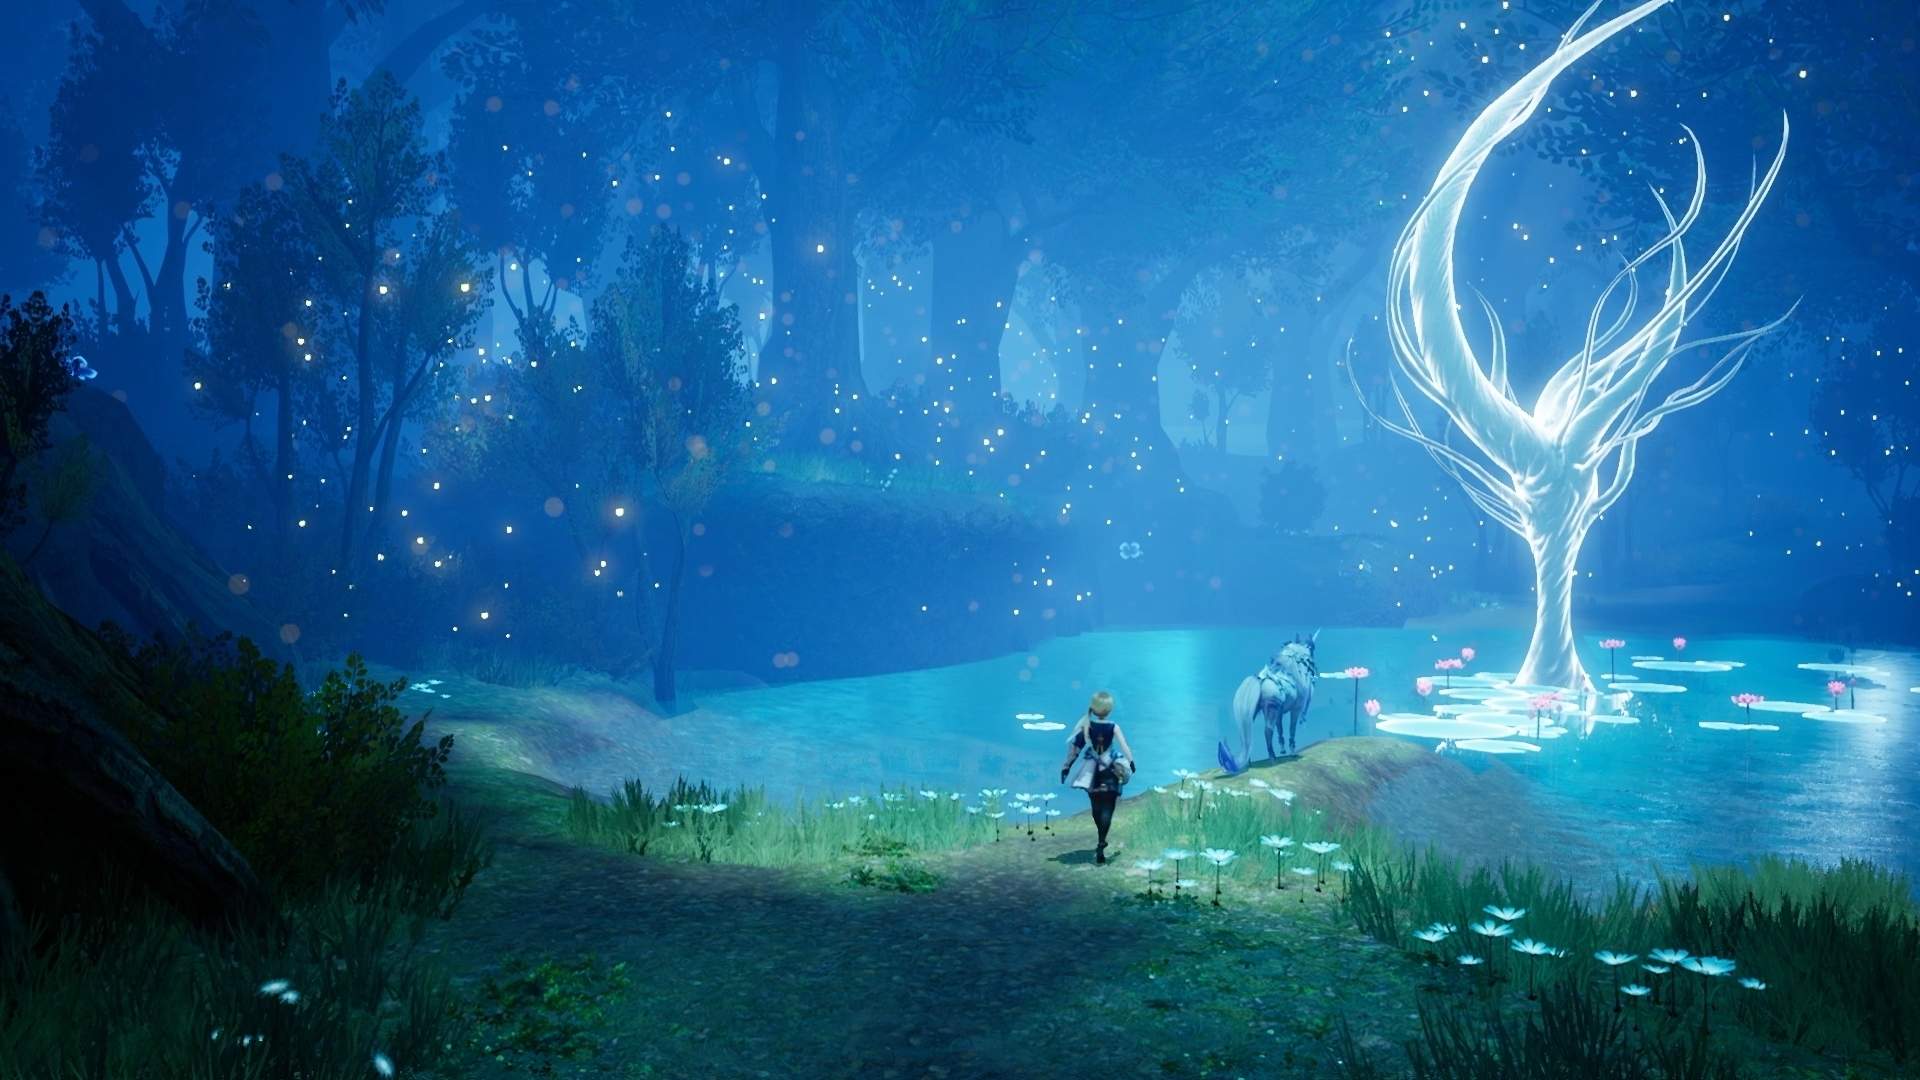 Main character Ein with another character Unicorn exploring the forest at night.